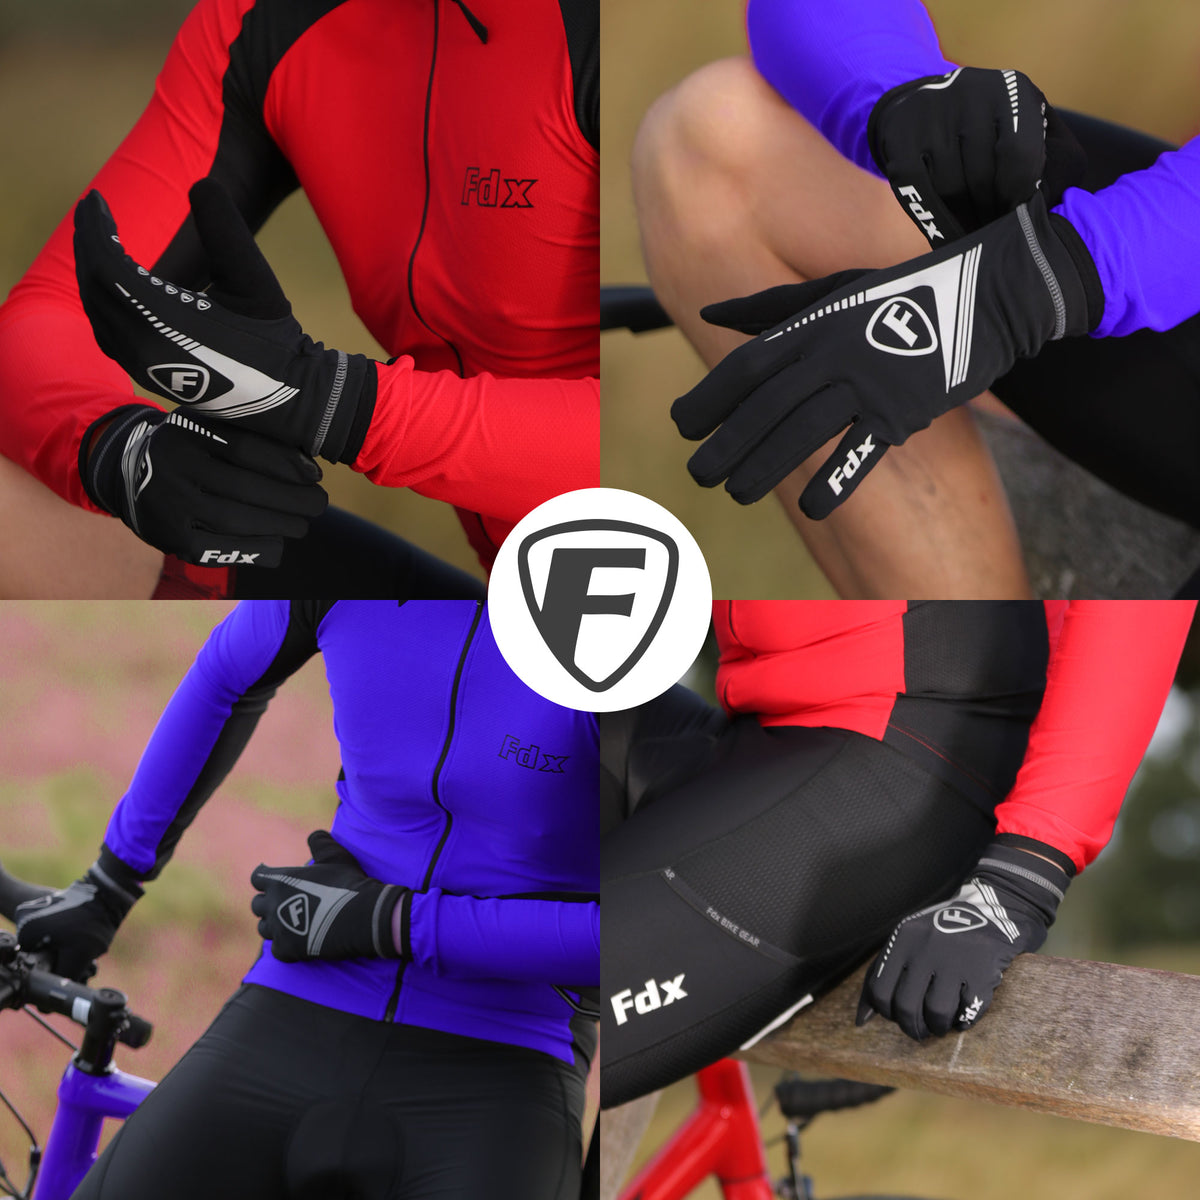 Fdx Frost Full Finger Winter Cycling Gloves Yellow, Red & Black